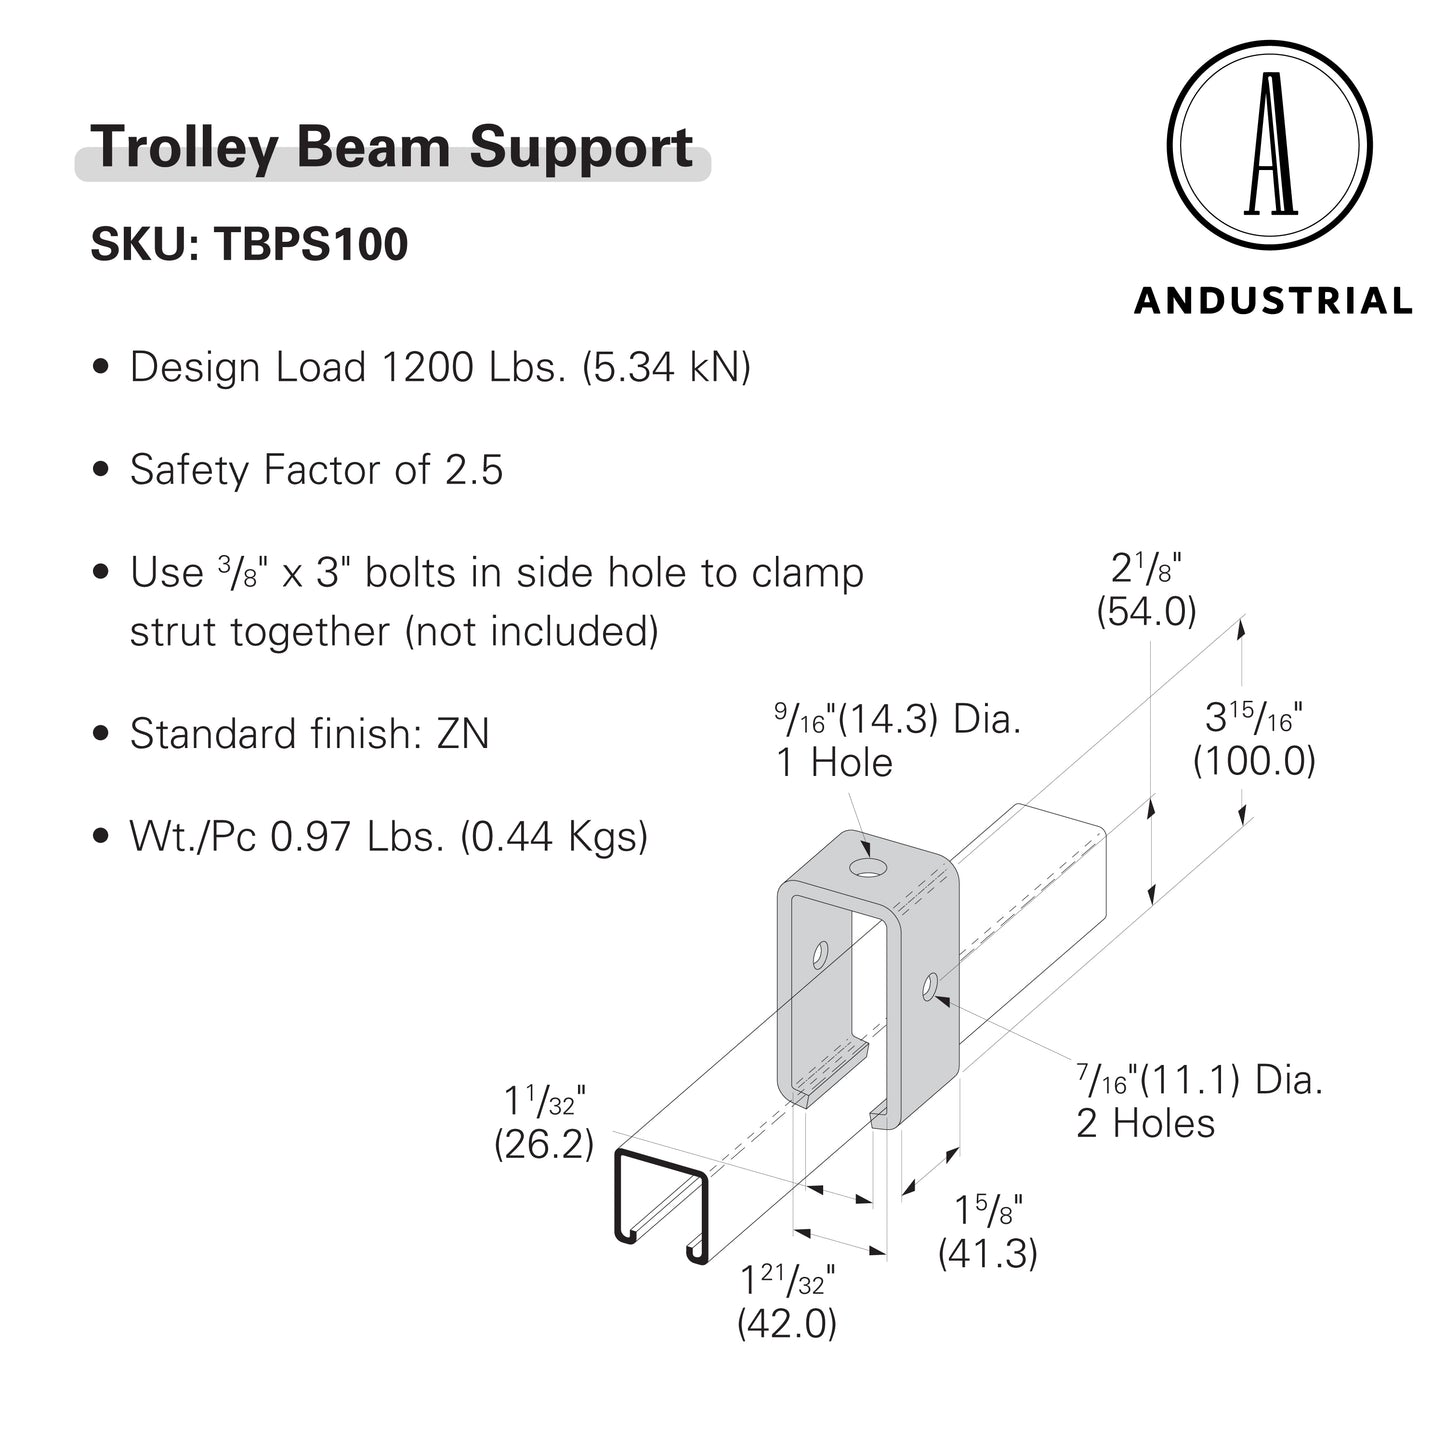 Trolley Beam Support